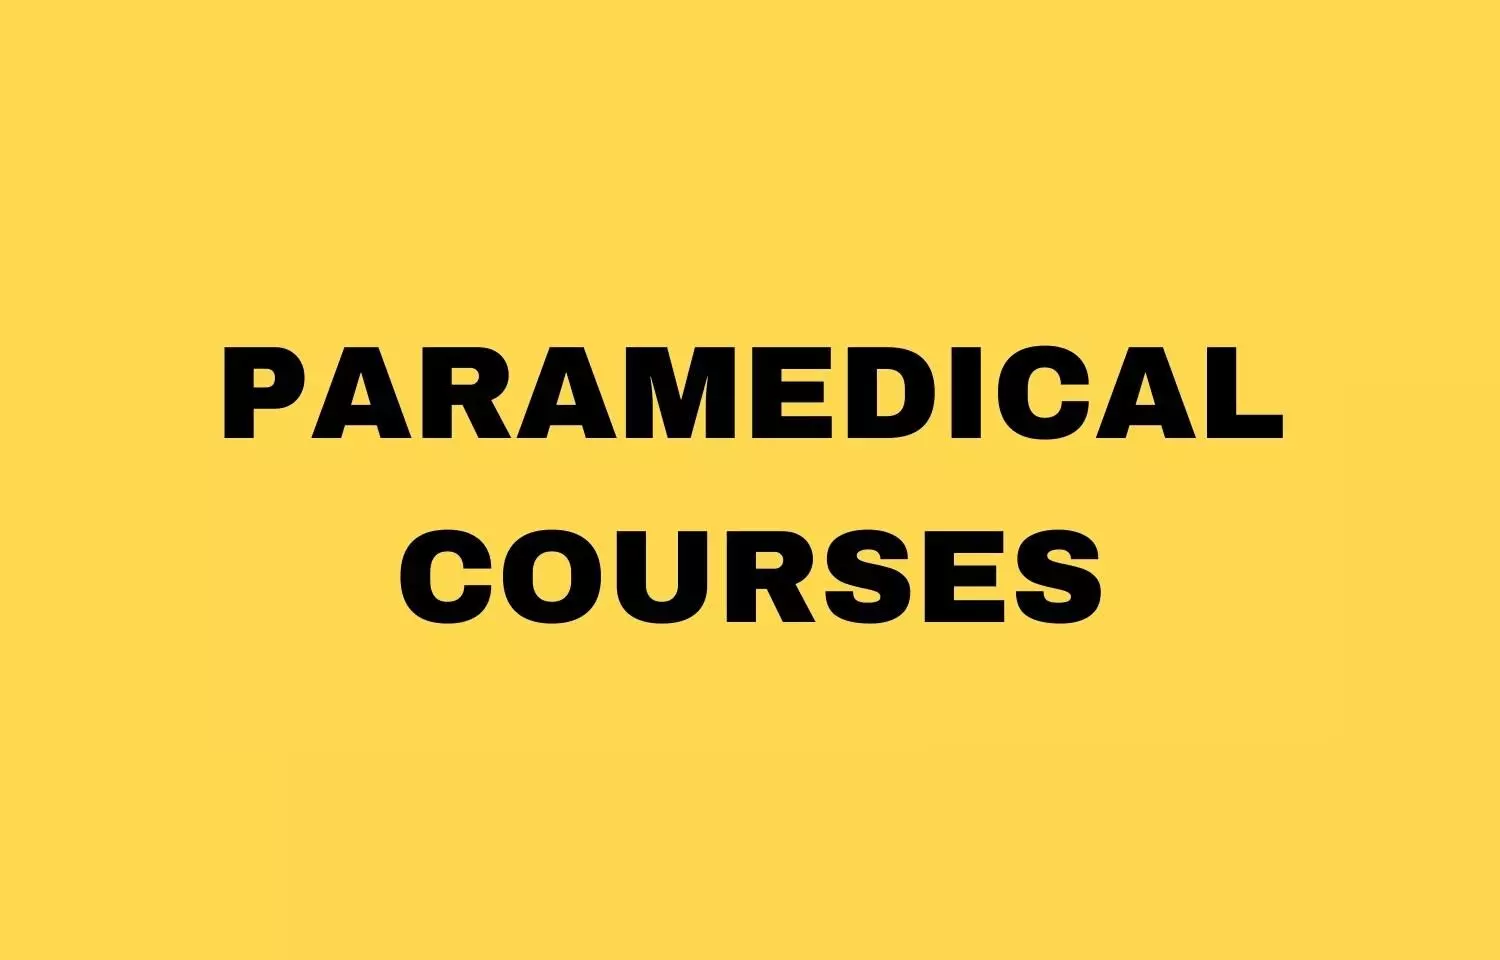 PGIMER opens Edit Window For Bsc Paramedical Courses applications, details